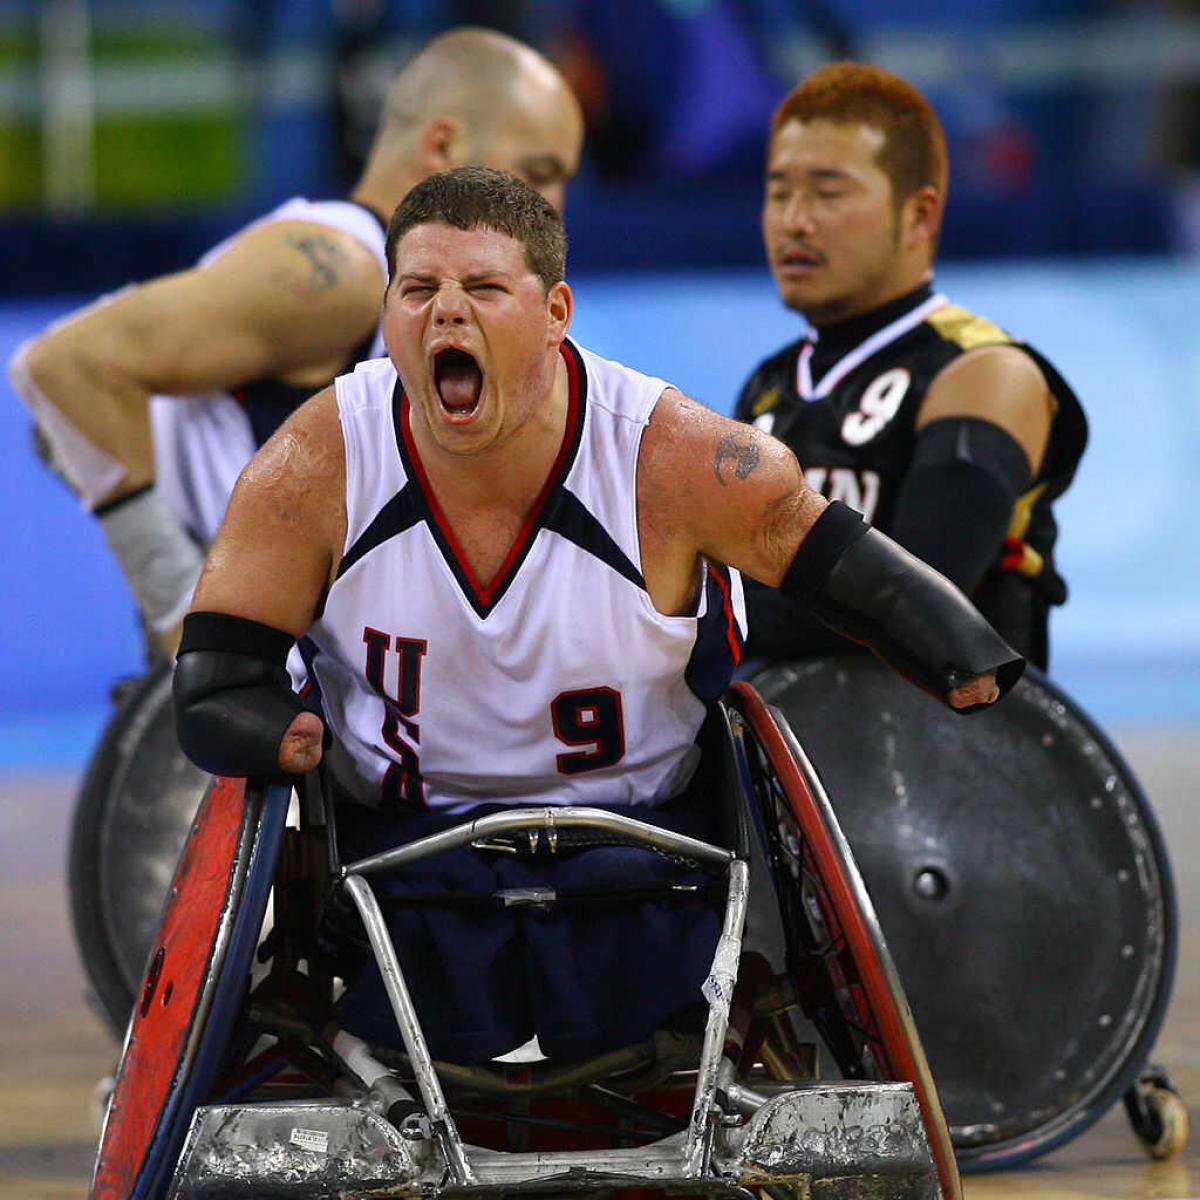 Male wheelchair rugby player celebrating 